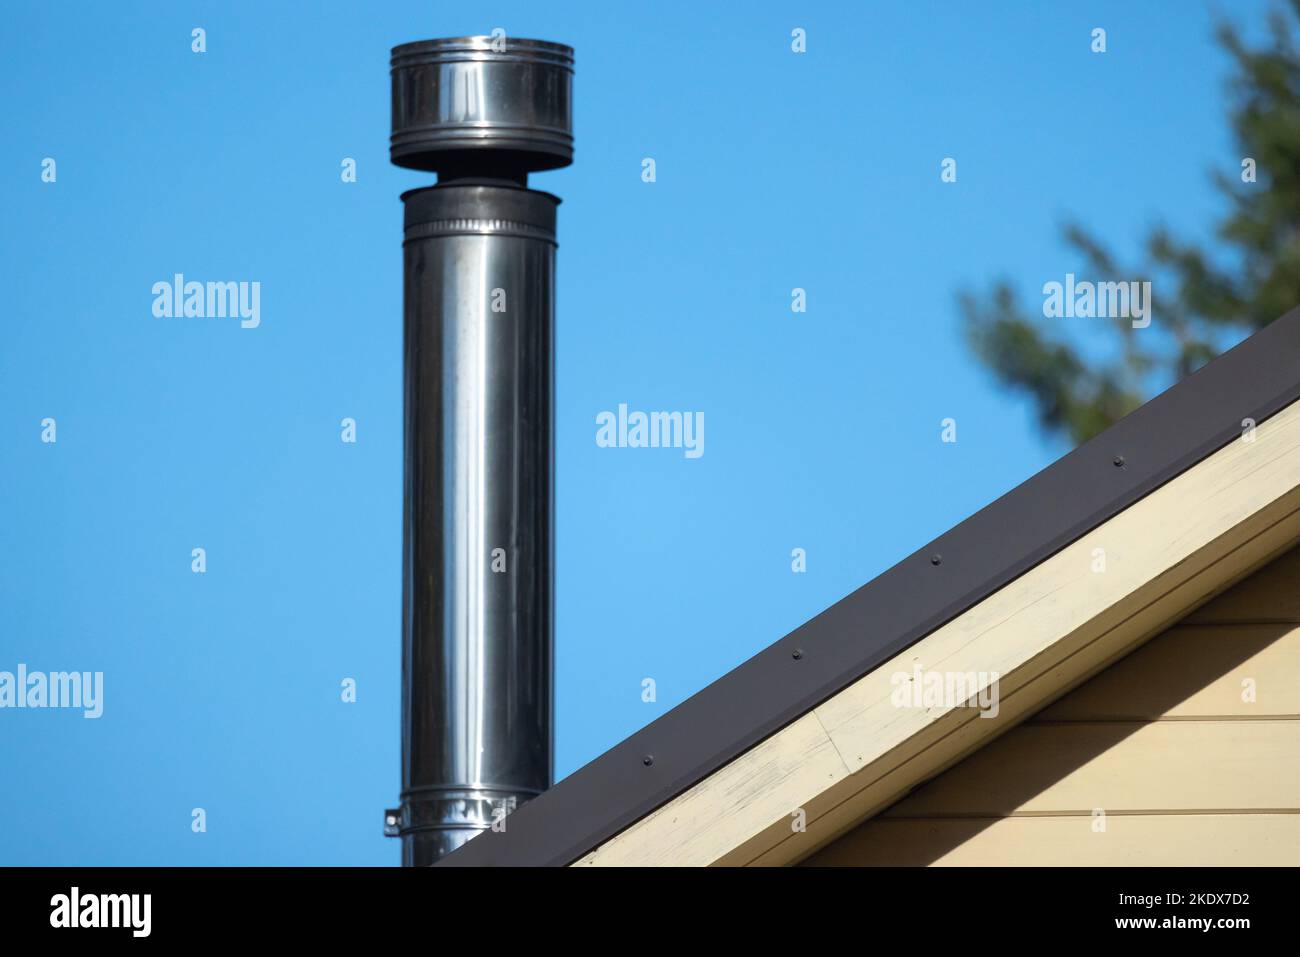 Round metal chimney is on a rural house roof Stock Photo